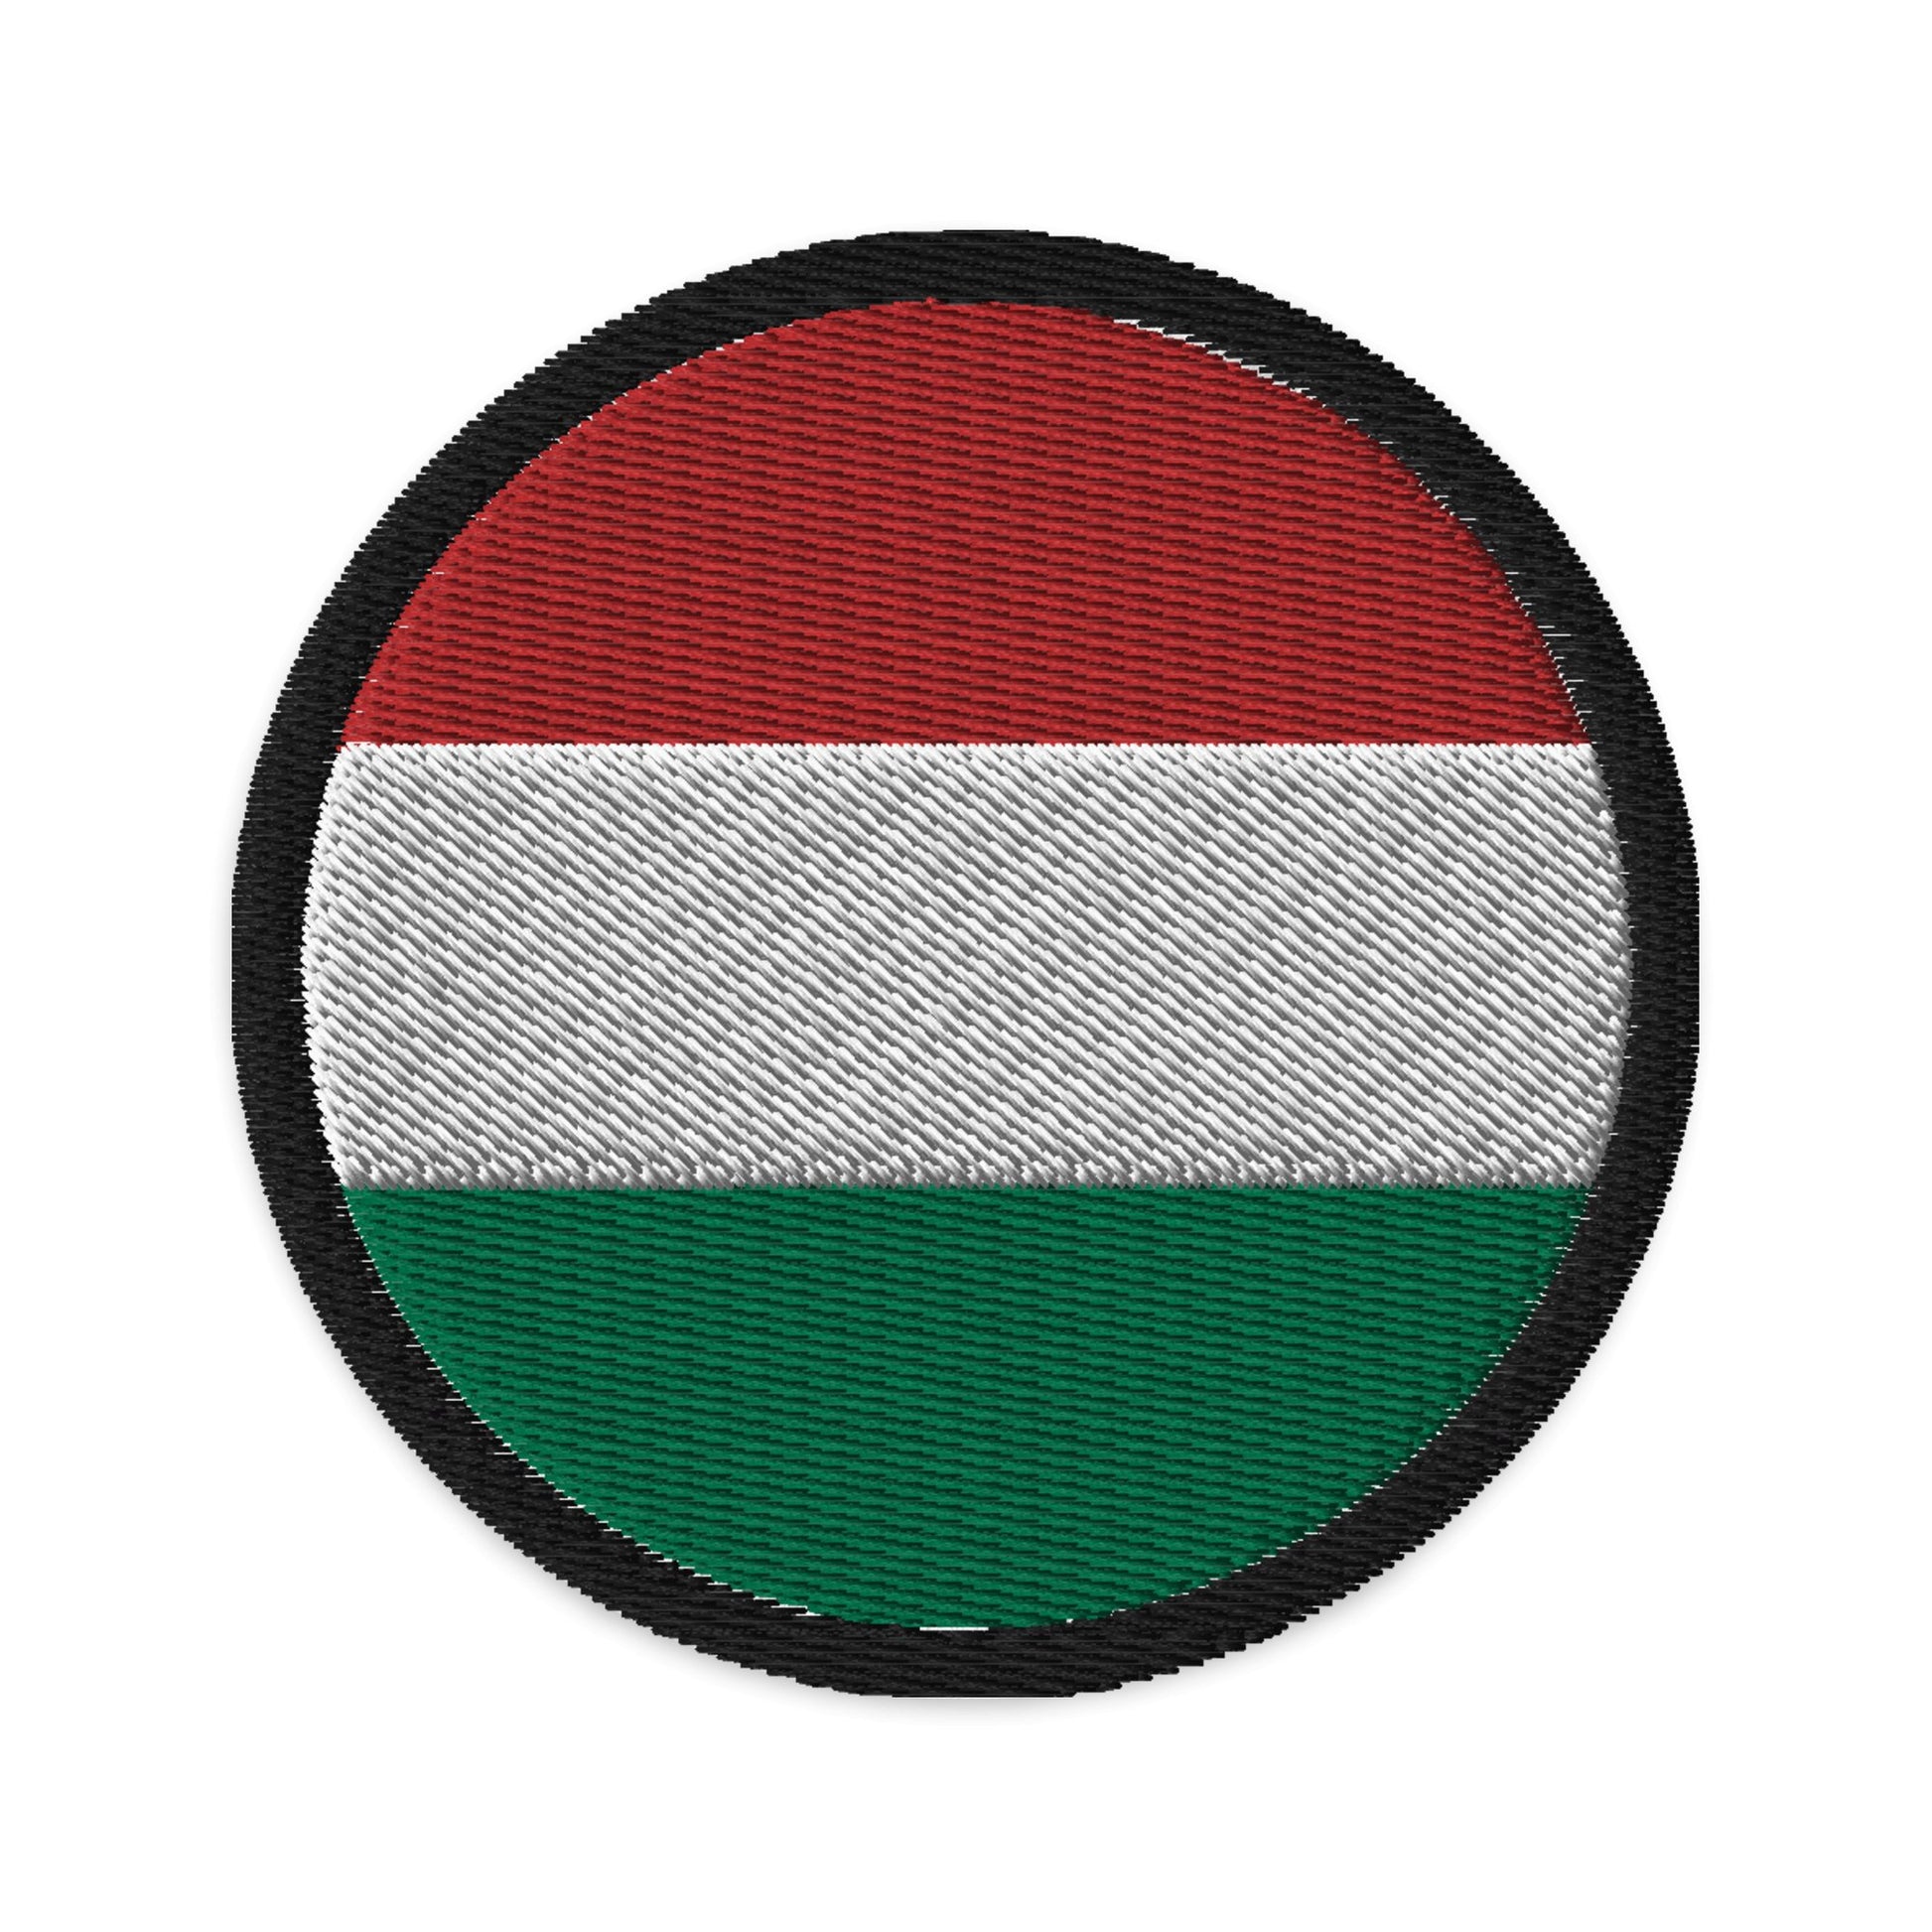 RR™ Hungarian Flag Design Embroidered Patches - Somocska - Red Rosehip Studio